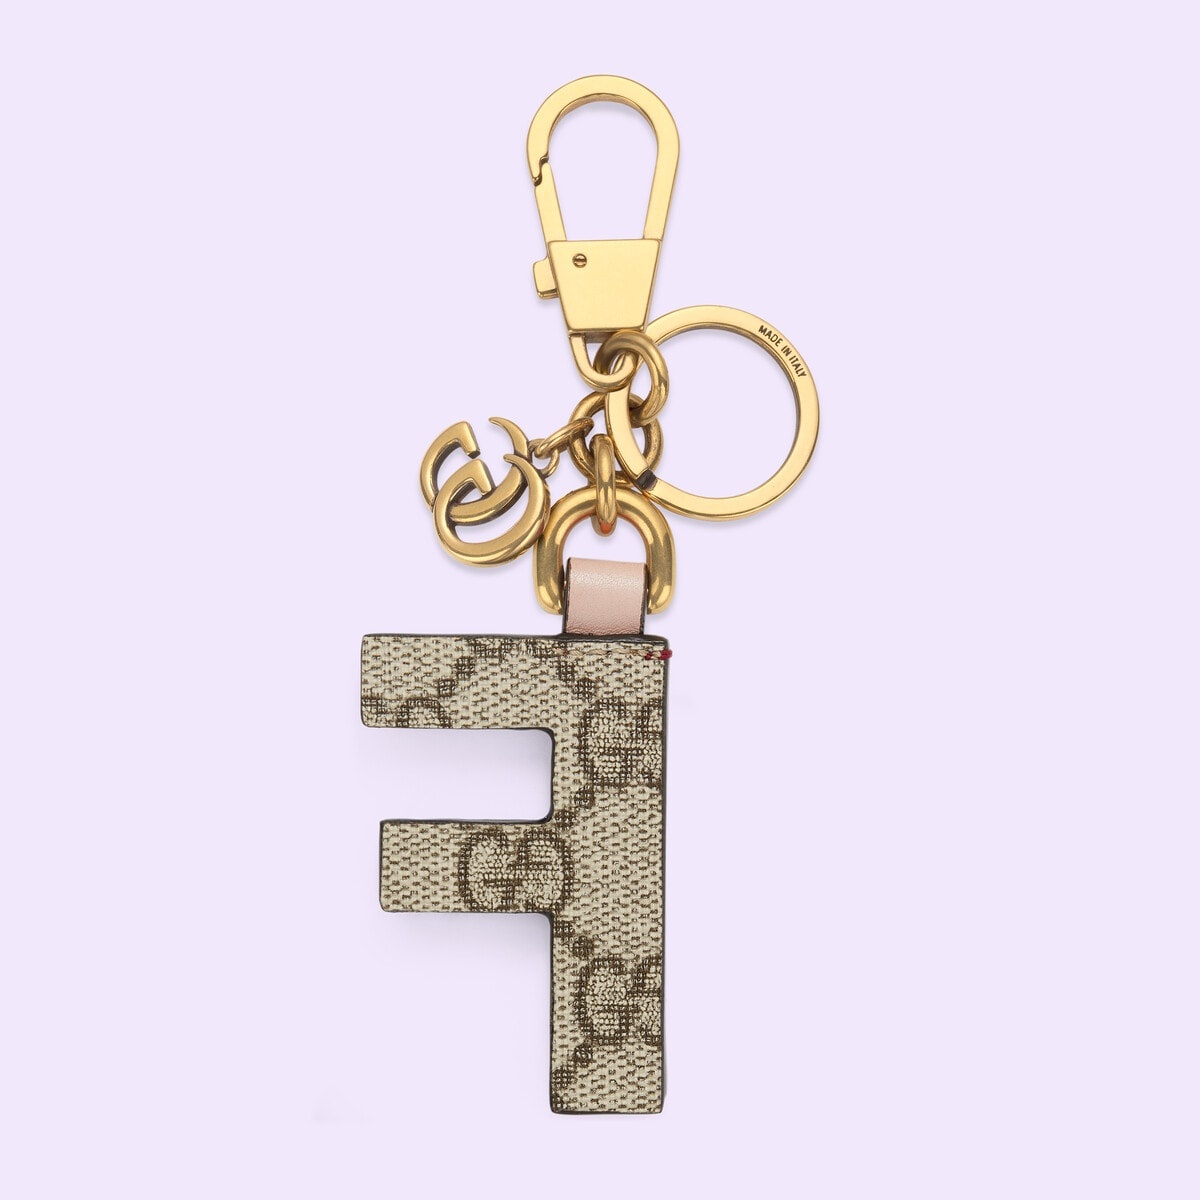 Letter F keychain - 2